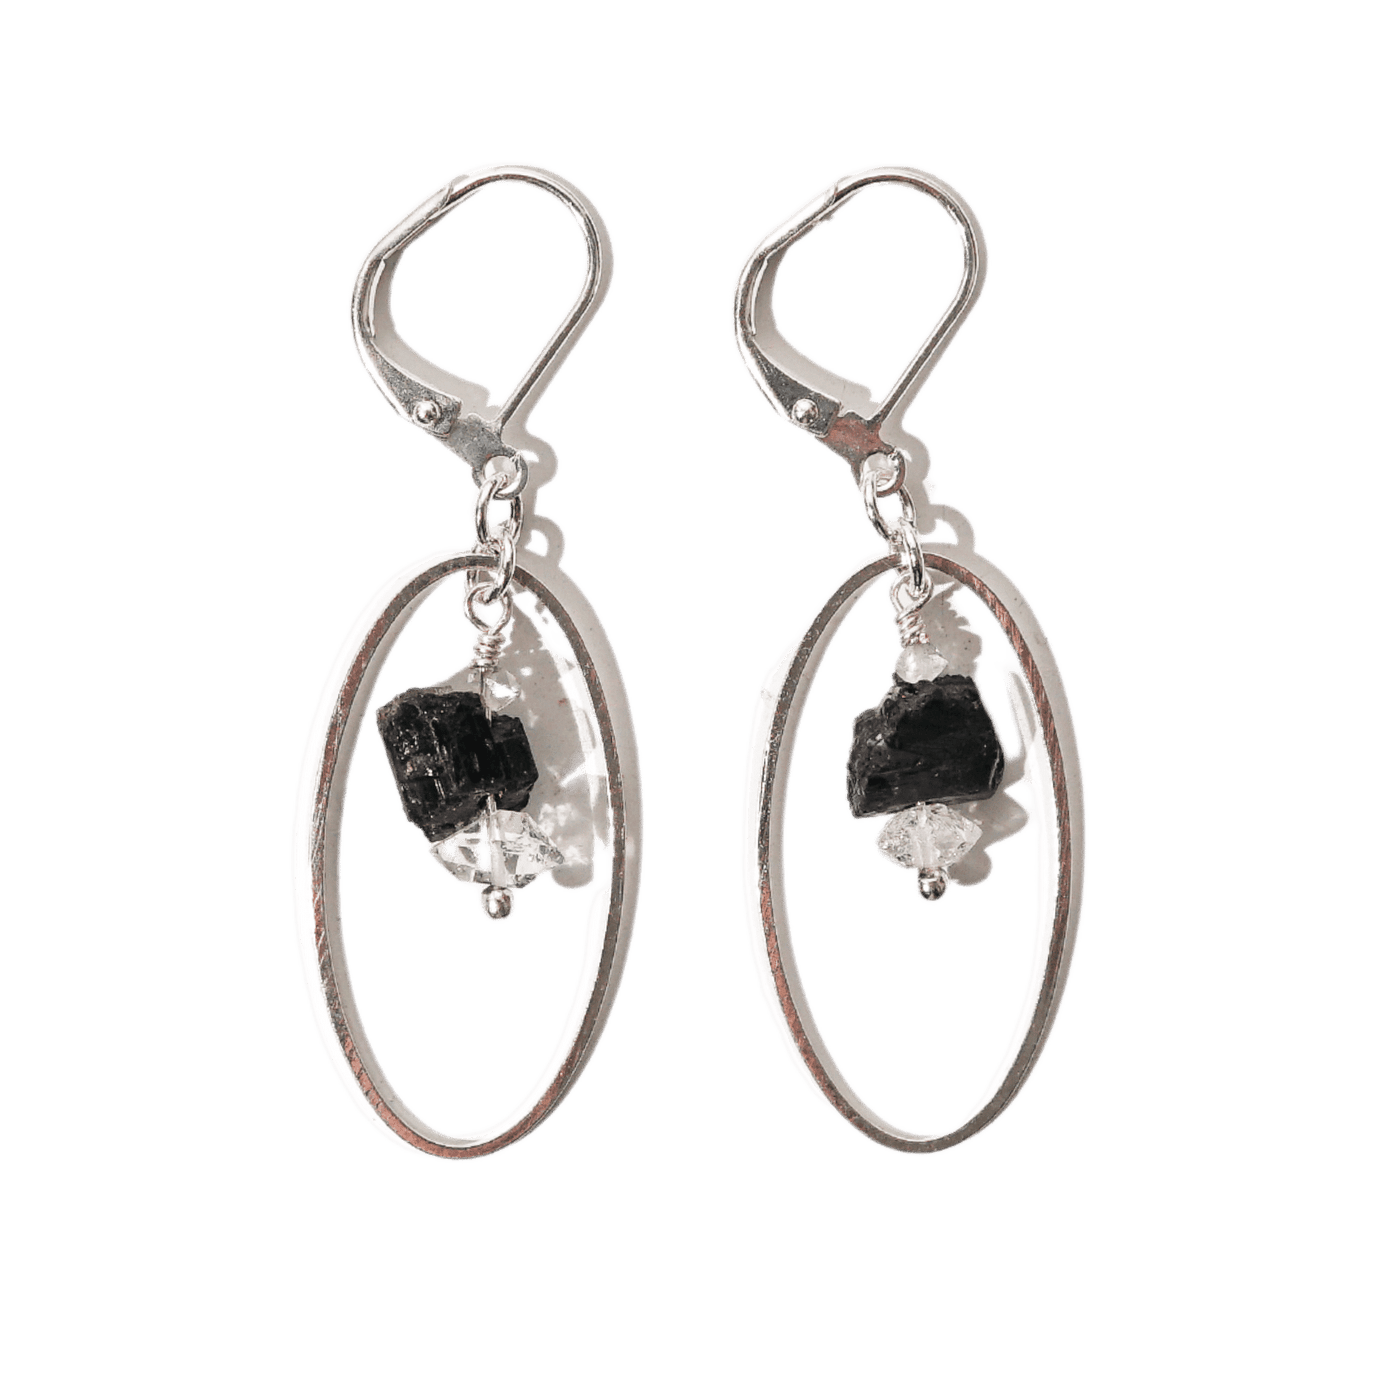 close up view of oval hoop earrings with genuine Black Tourmaline and Herkimer Diamond stones by Energy Muse